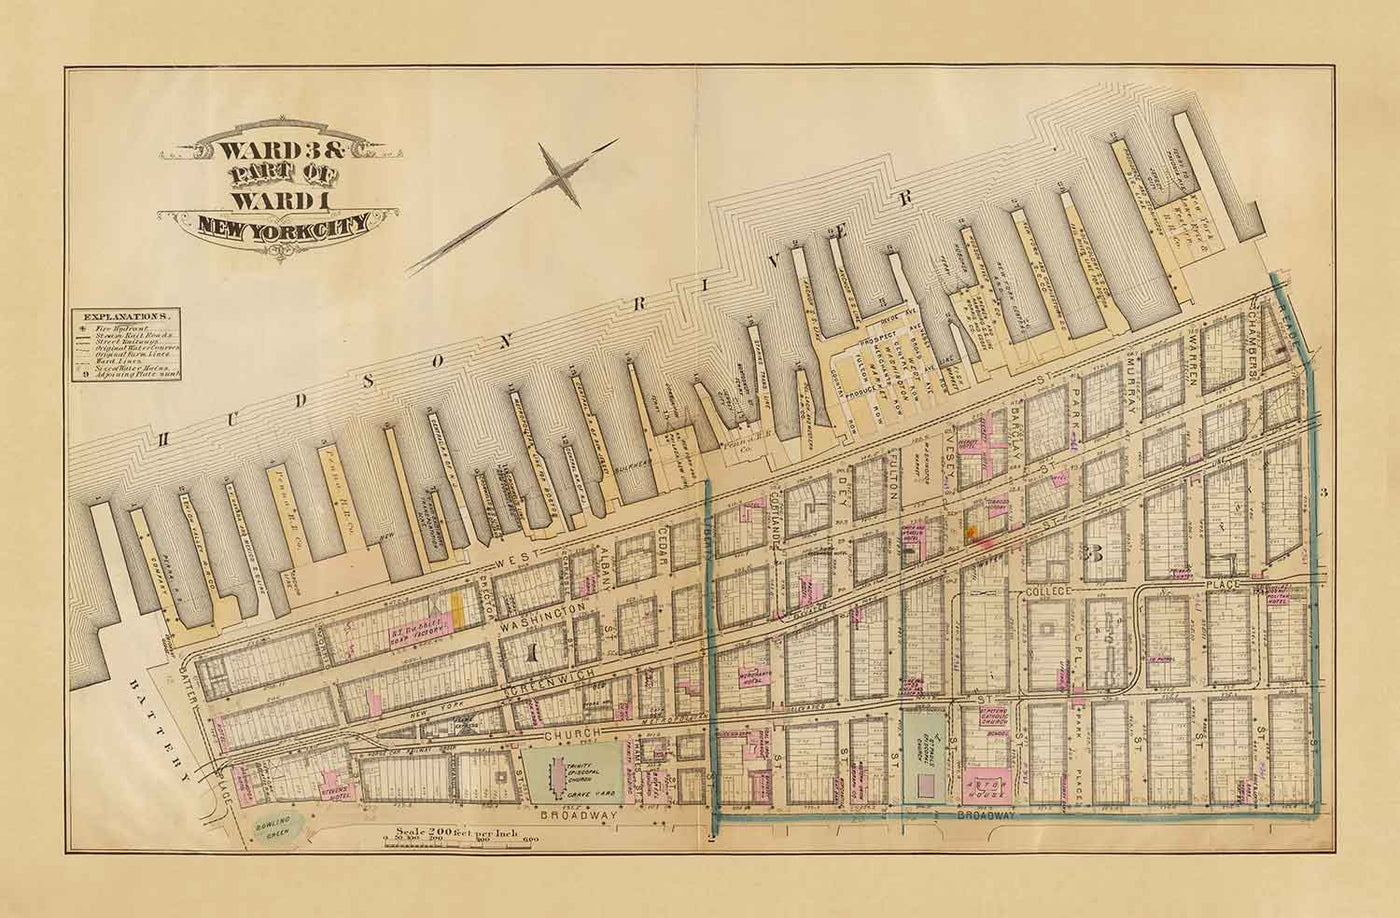 Old Map of Battery Park City & Tribeca, 1879 - Downtown Manhattan Wards NYC, Hudson River, Broadway, Greenwich St, West St